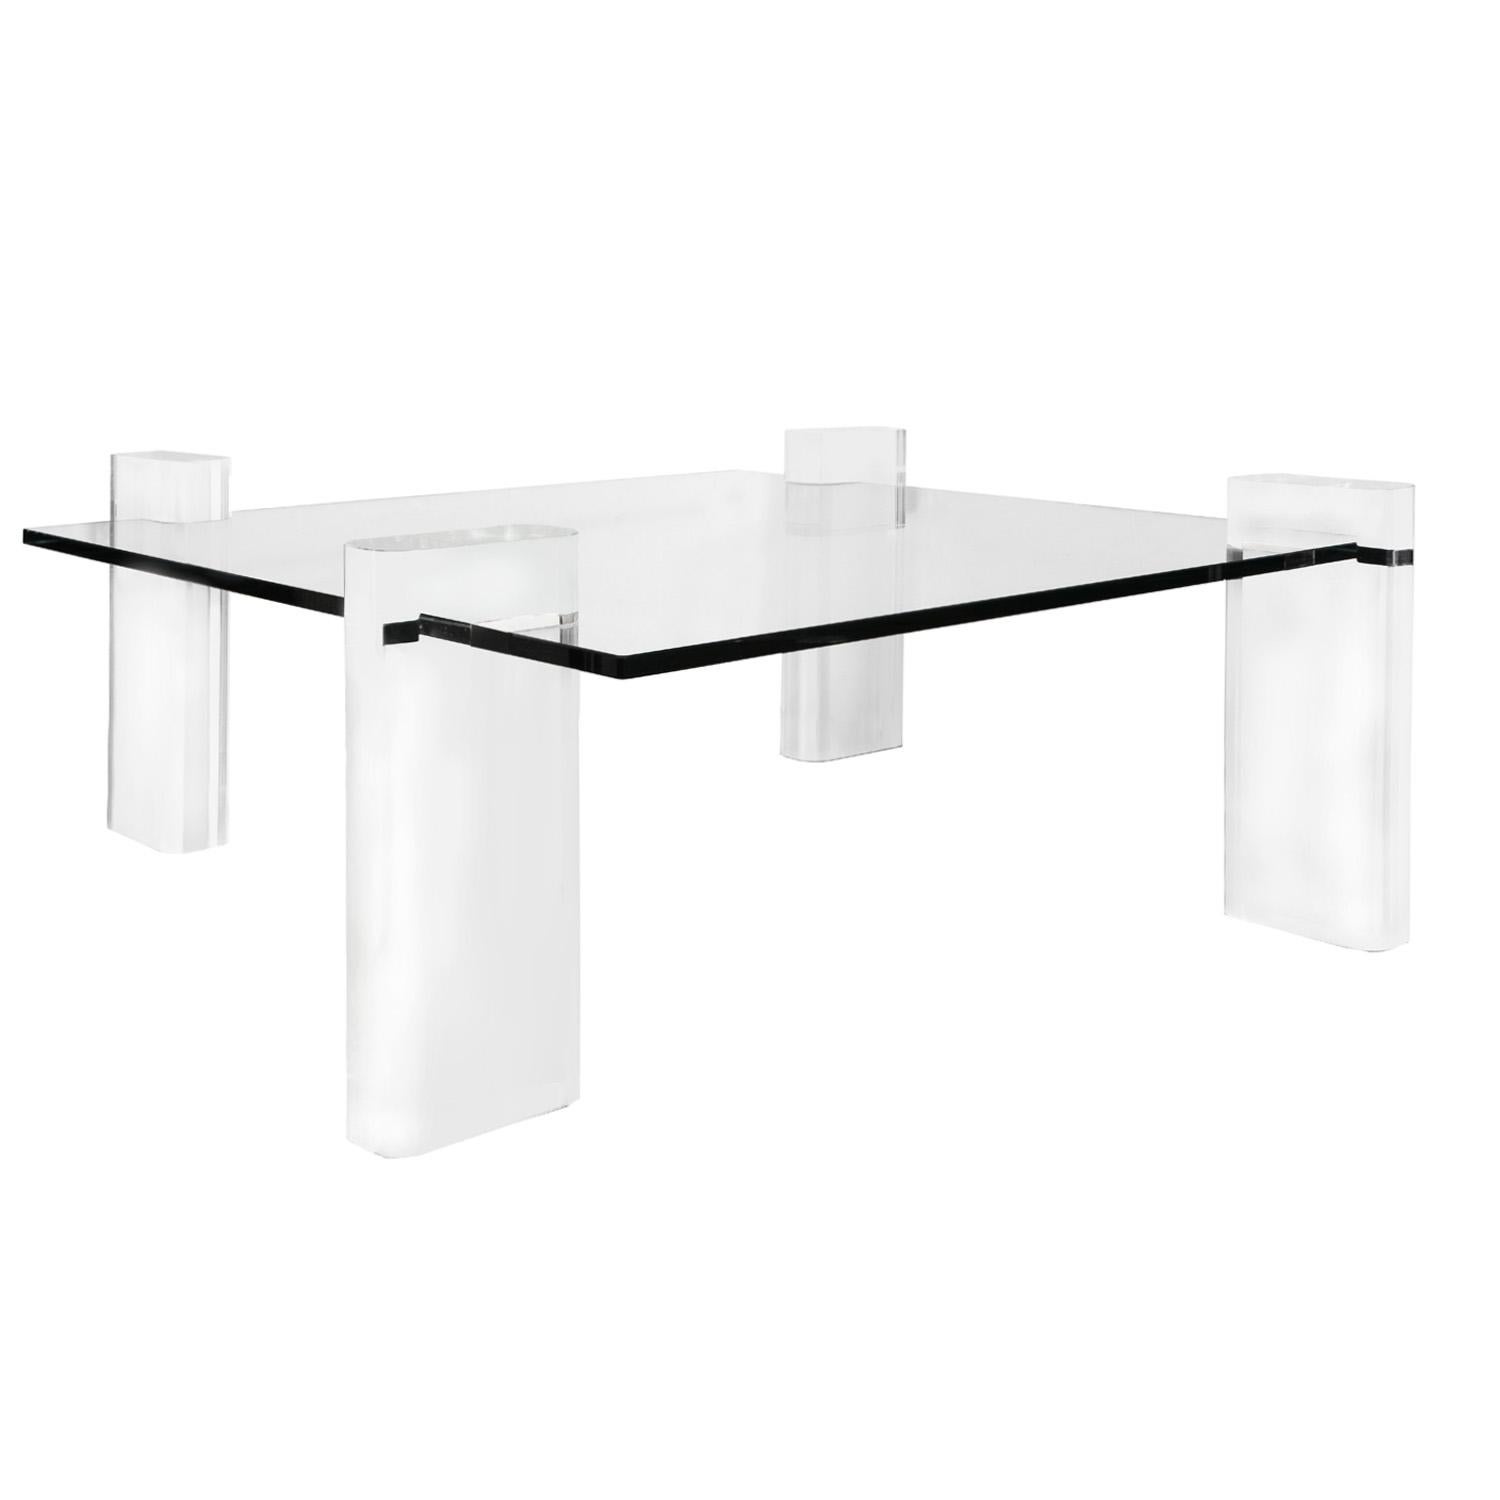 Clear solid Lucite leg coffee table with thick glass top by Karl Springer, American 1980's
The legs of this iconic table can be reconfigured to accommodate a round or square top of varying dimensions.

Dimensions as shown:
Width: 54 inches
Depth:v54